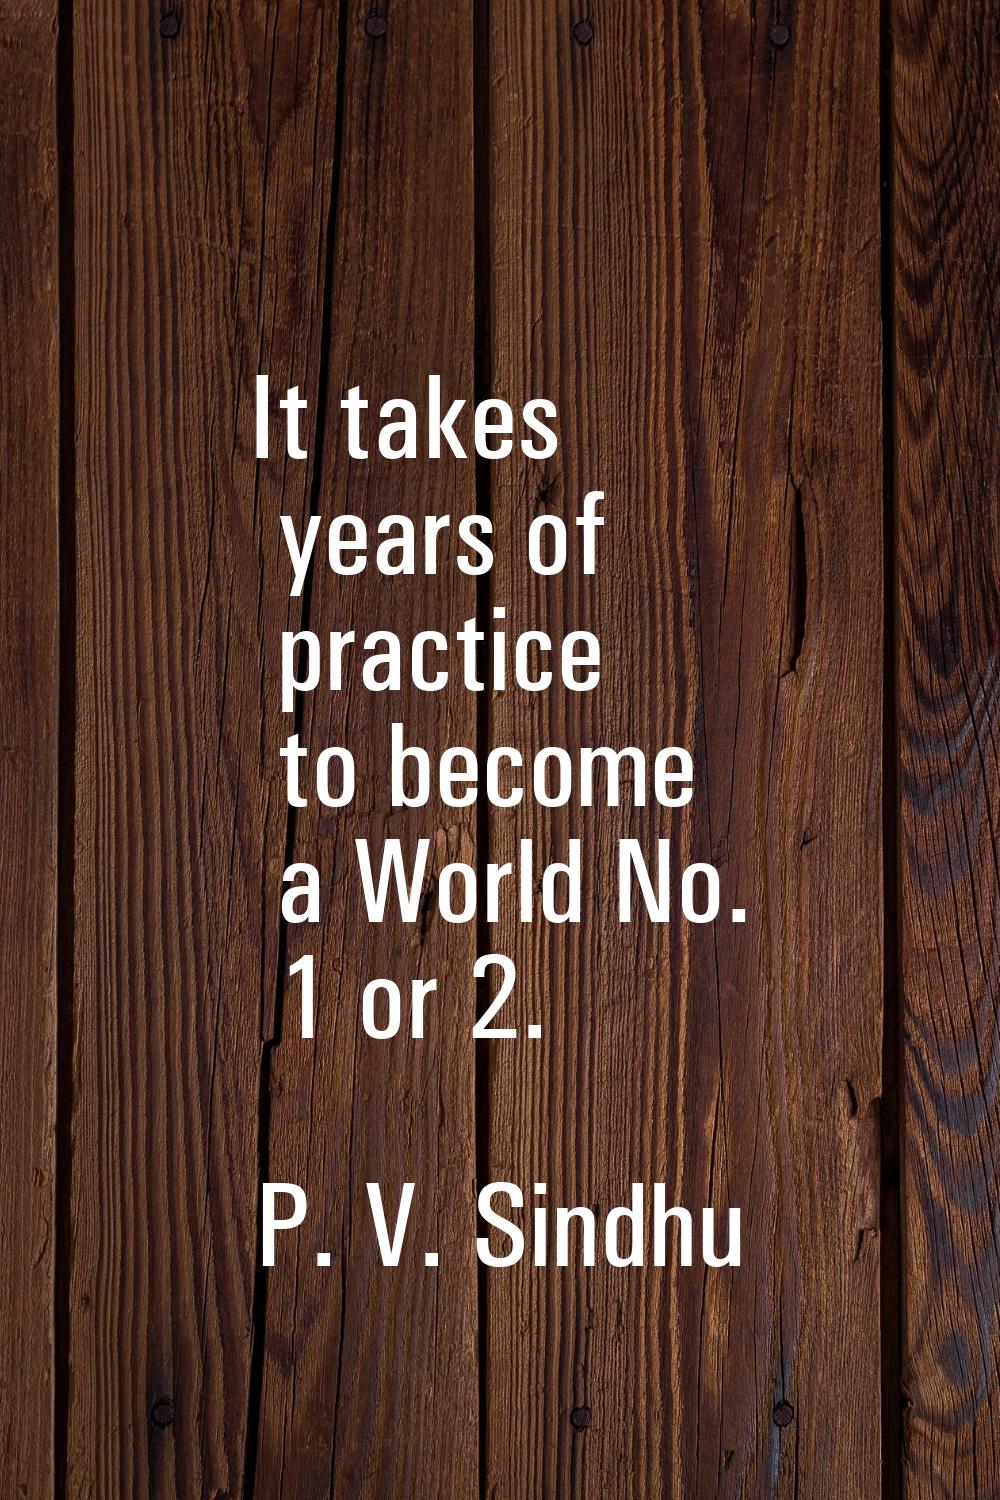 It takes years of practice to become a World No. 1 or 2.